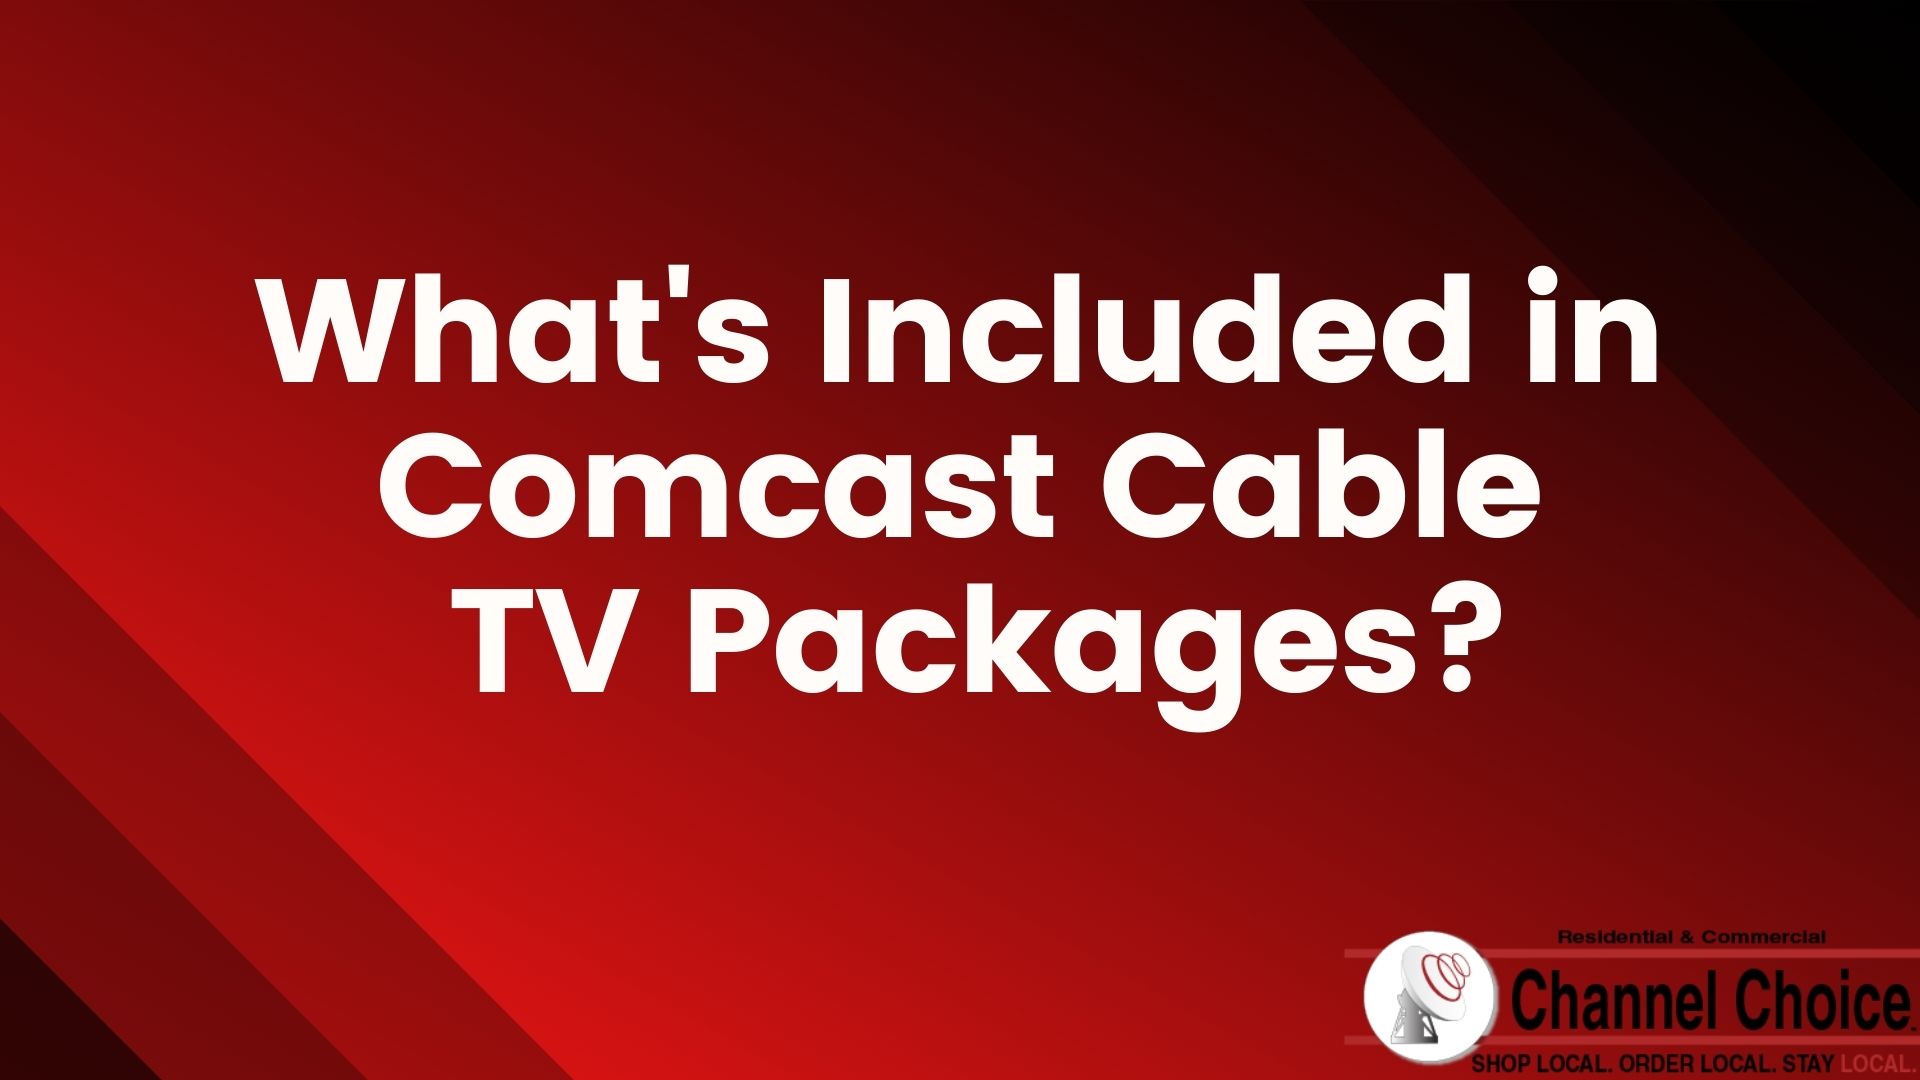 Comcast Cable TV Packages Channel Choice Comcast TV Offerings